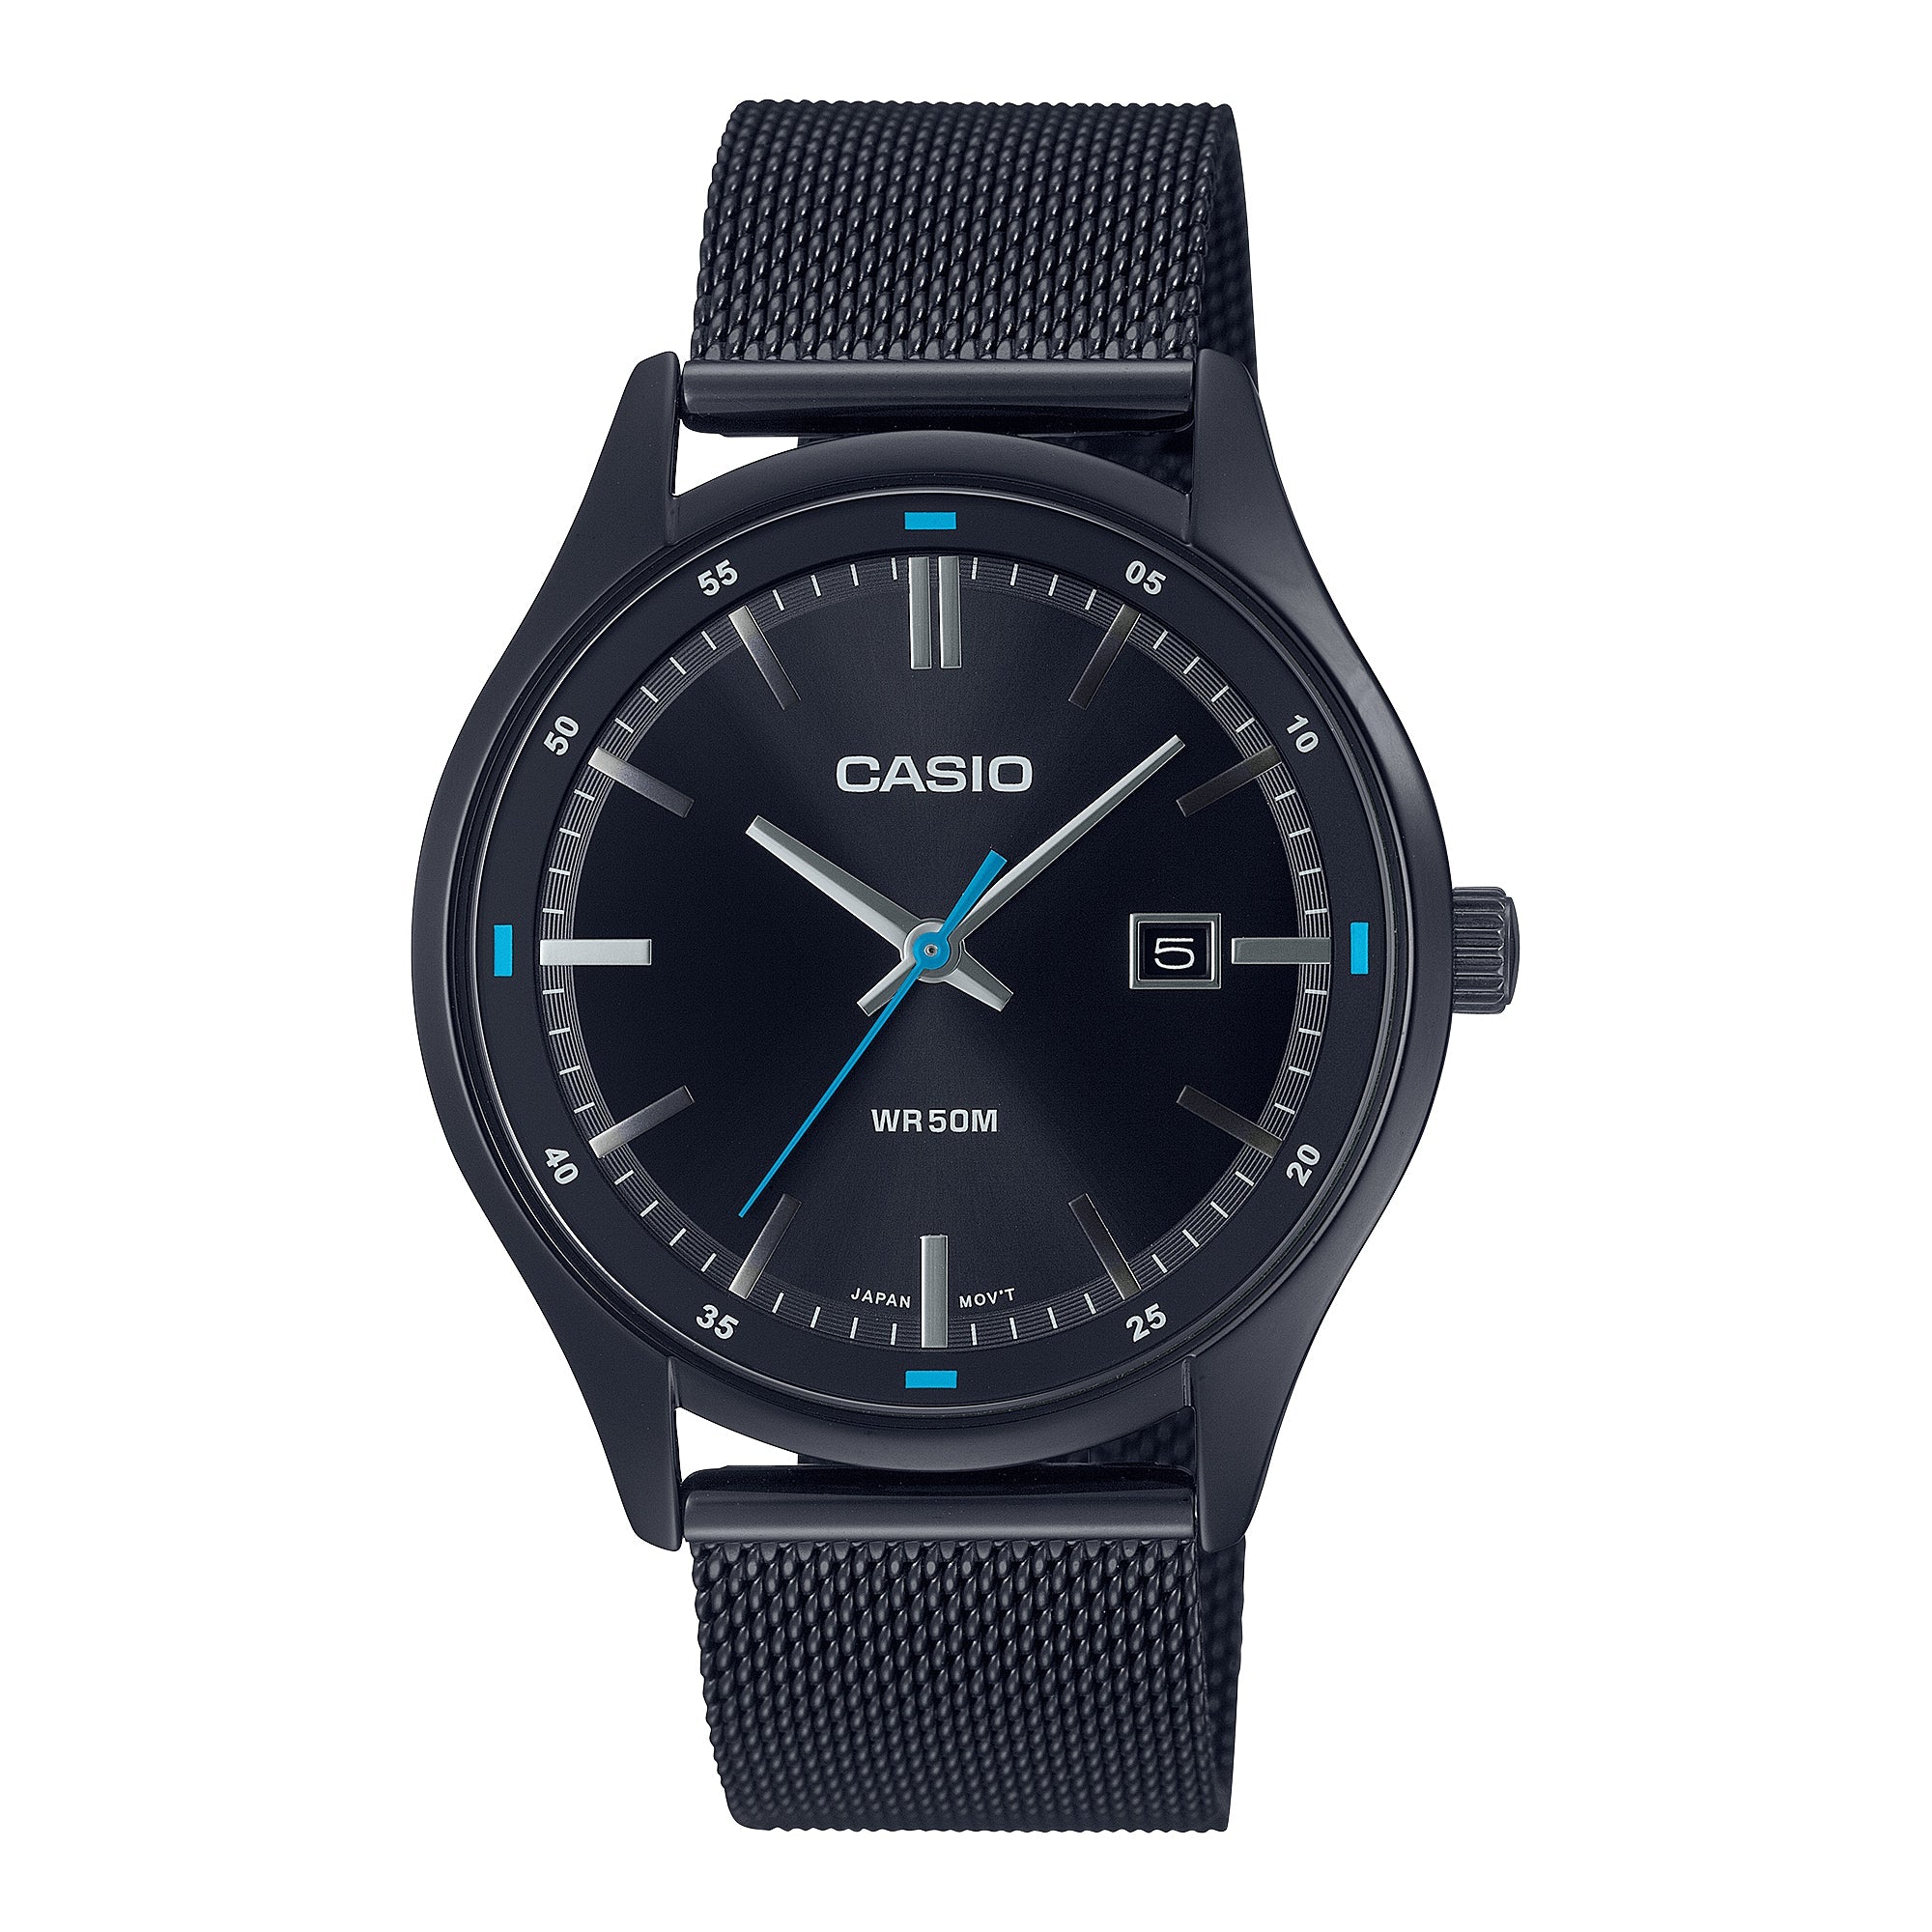 Casio Men's Analog Sporty Black Ion Plated Stainless Steel Mesh Band Watch MTPE710MB-1A MTP-E710MB-1A Watchspree